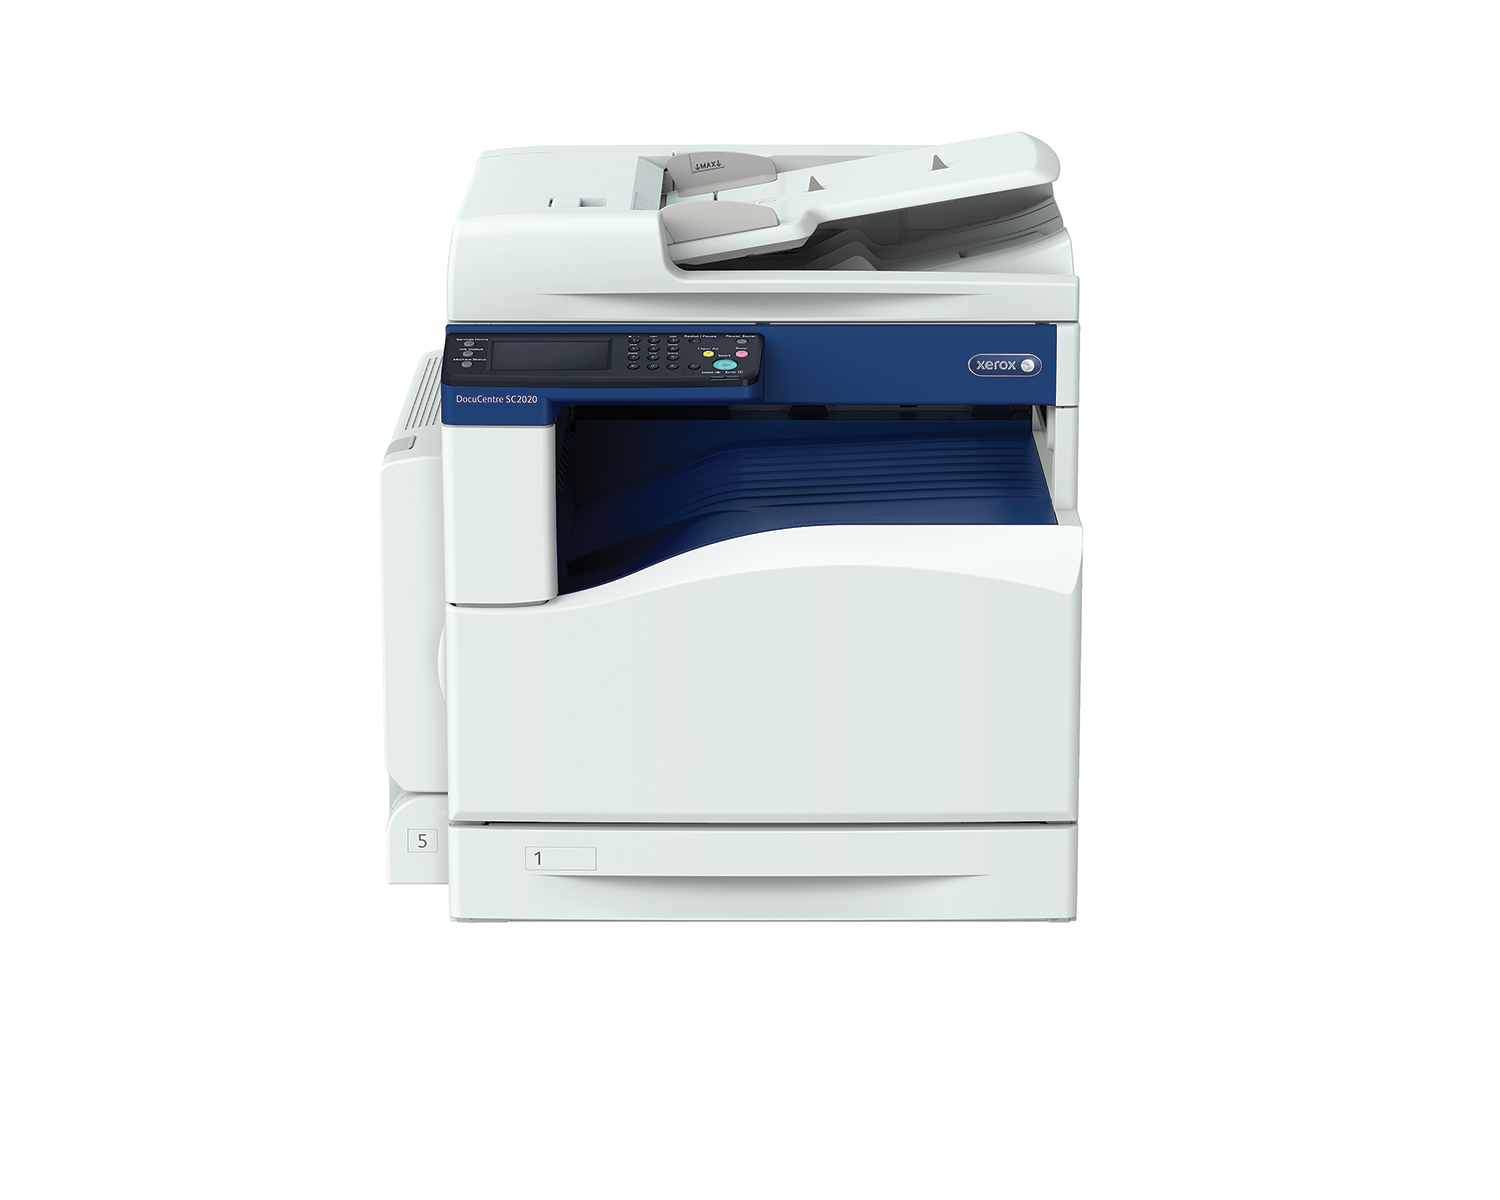 Xerox launches DocuCentre SC2020 in developing markets